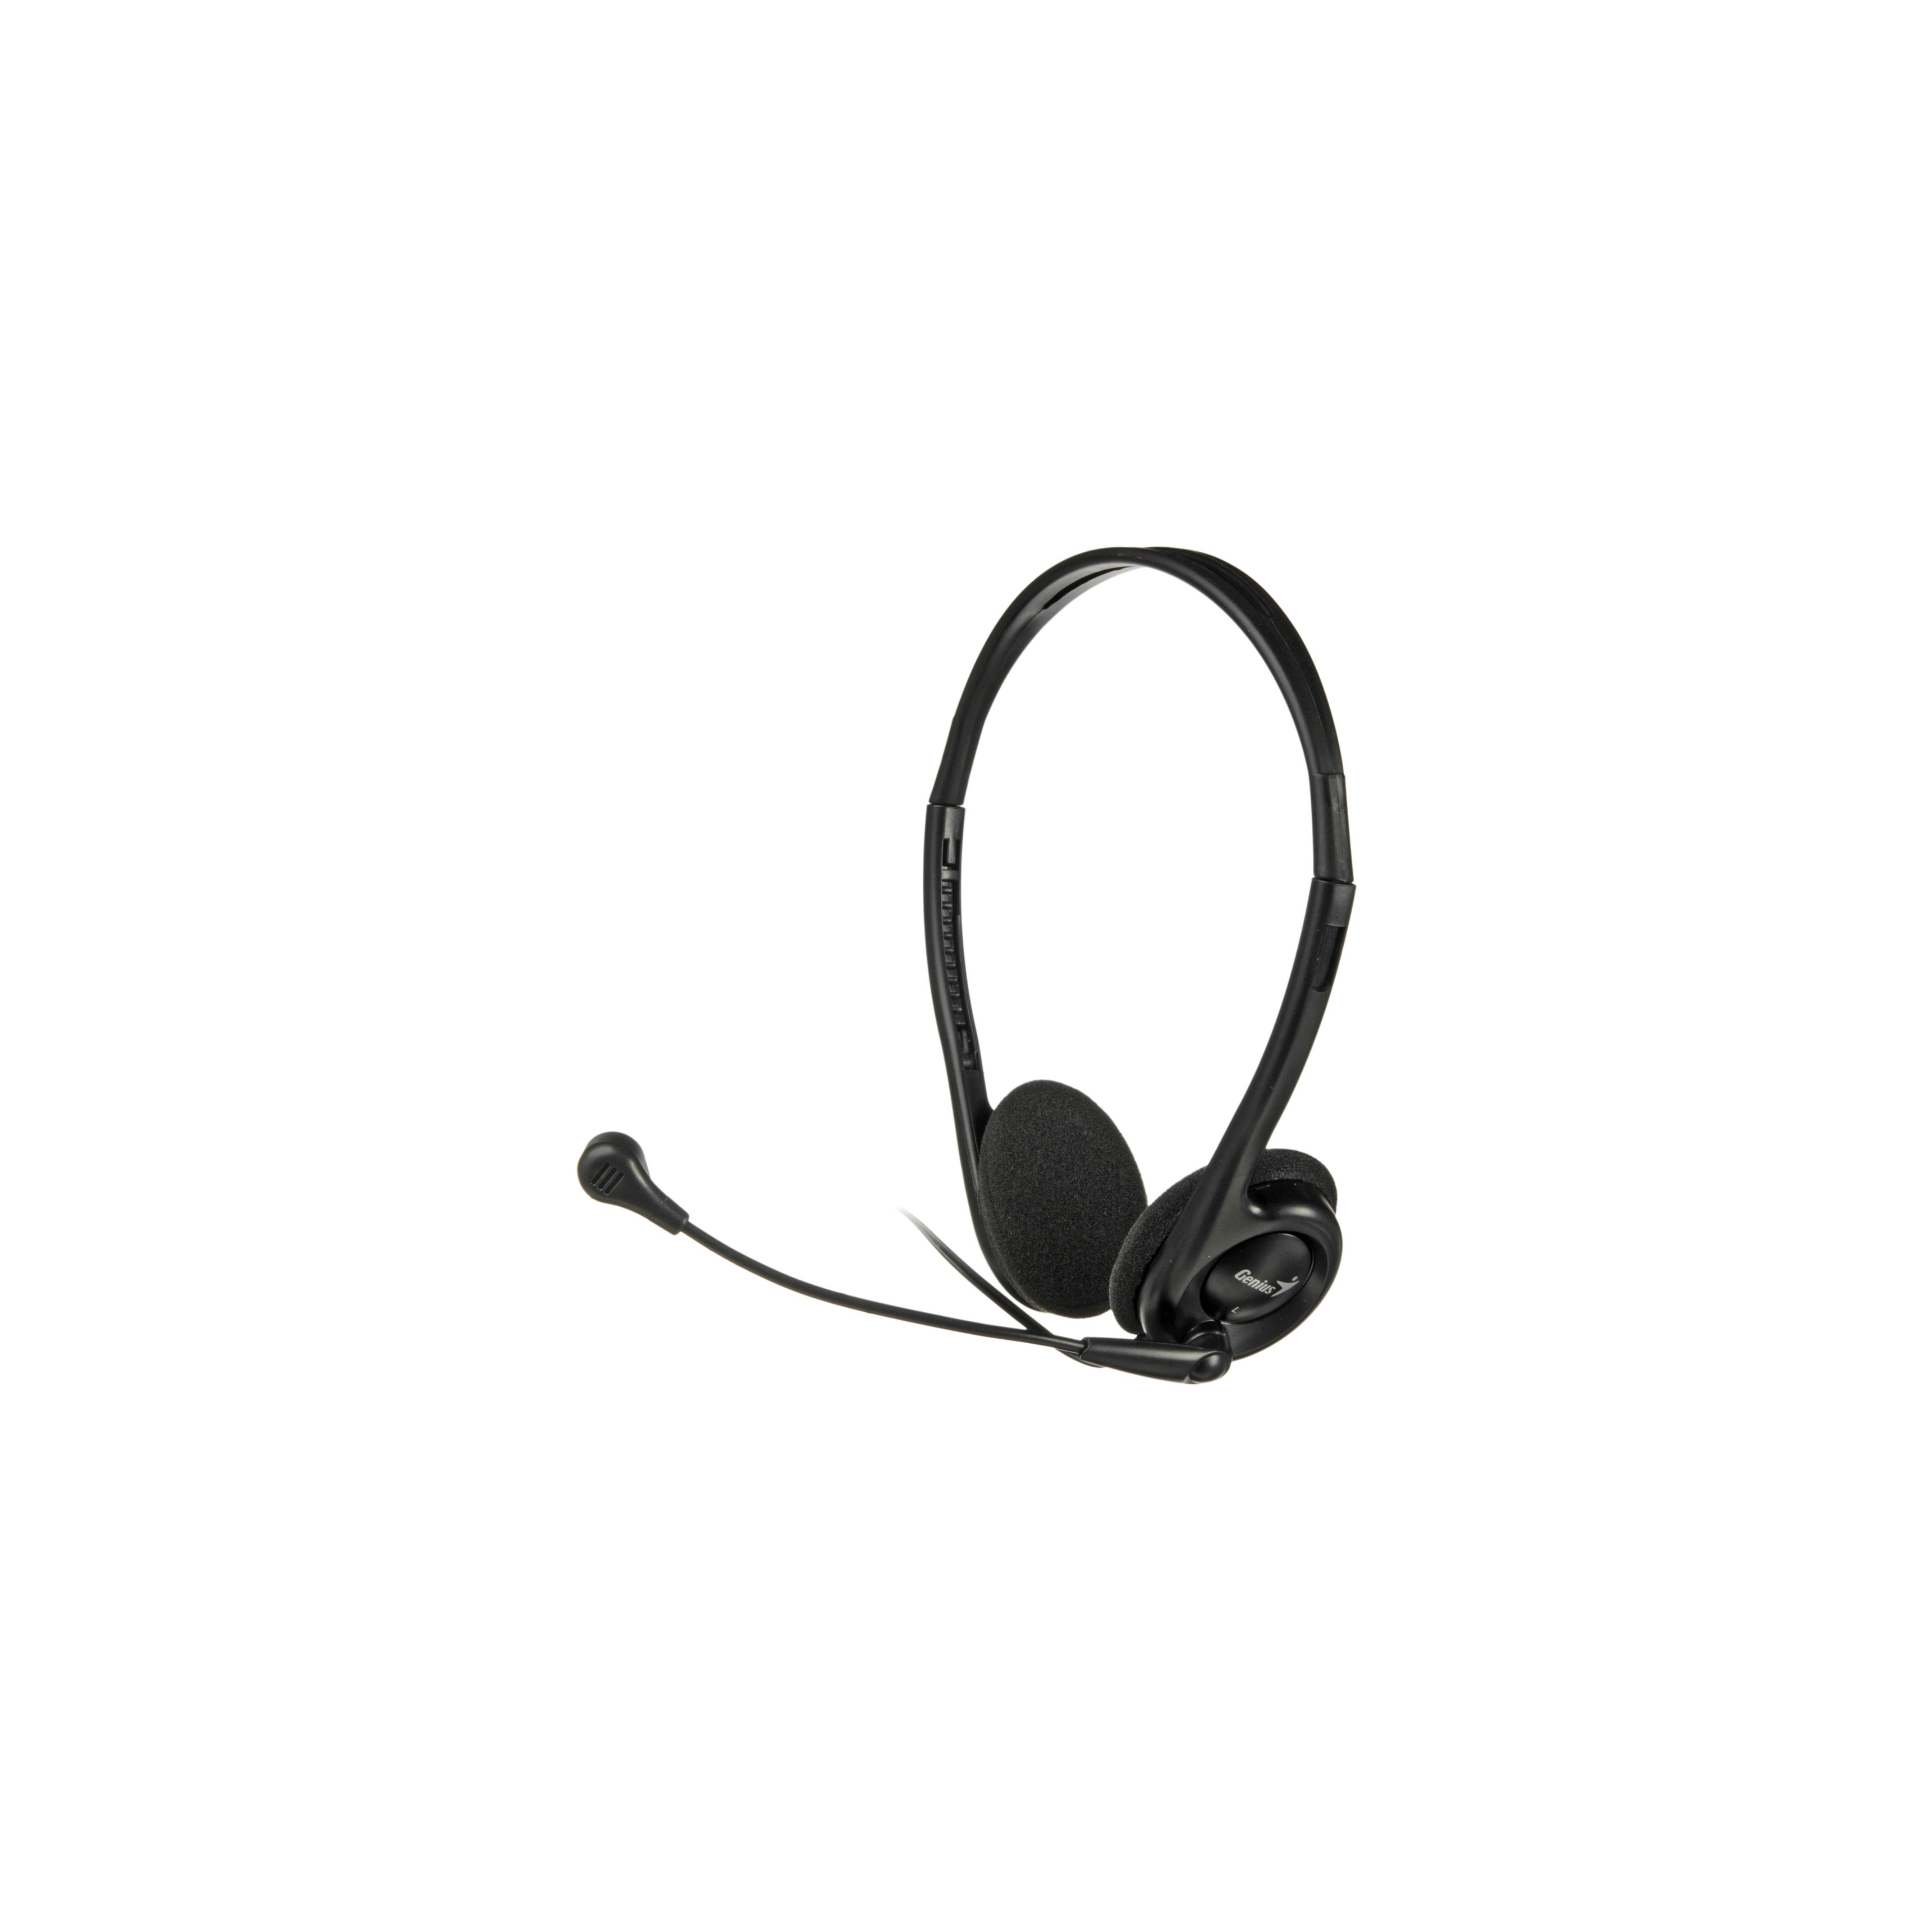 Genius HS-200C Headset With Rotational Microphone